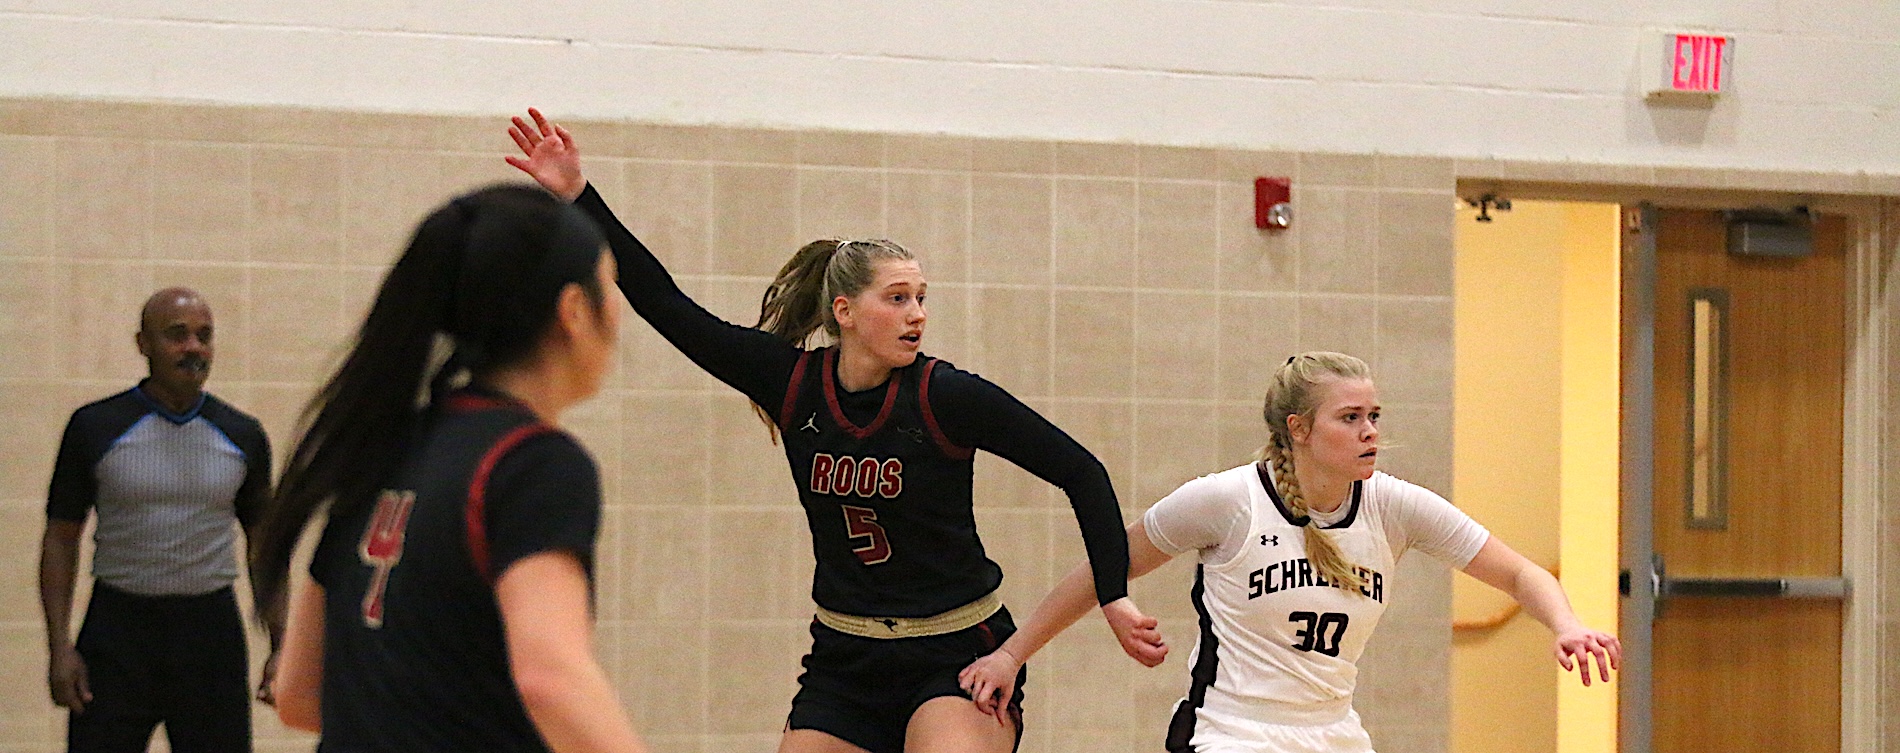 Hot-Shooting 'Roos Hold Off Schreiner